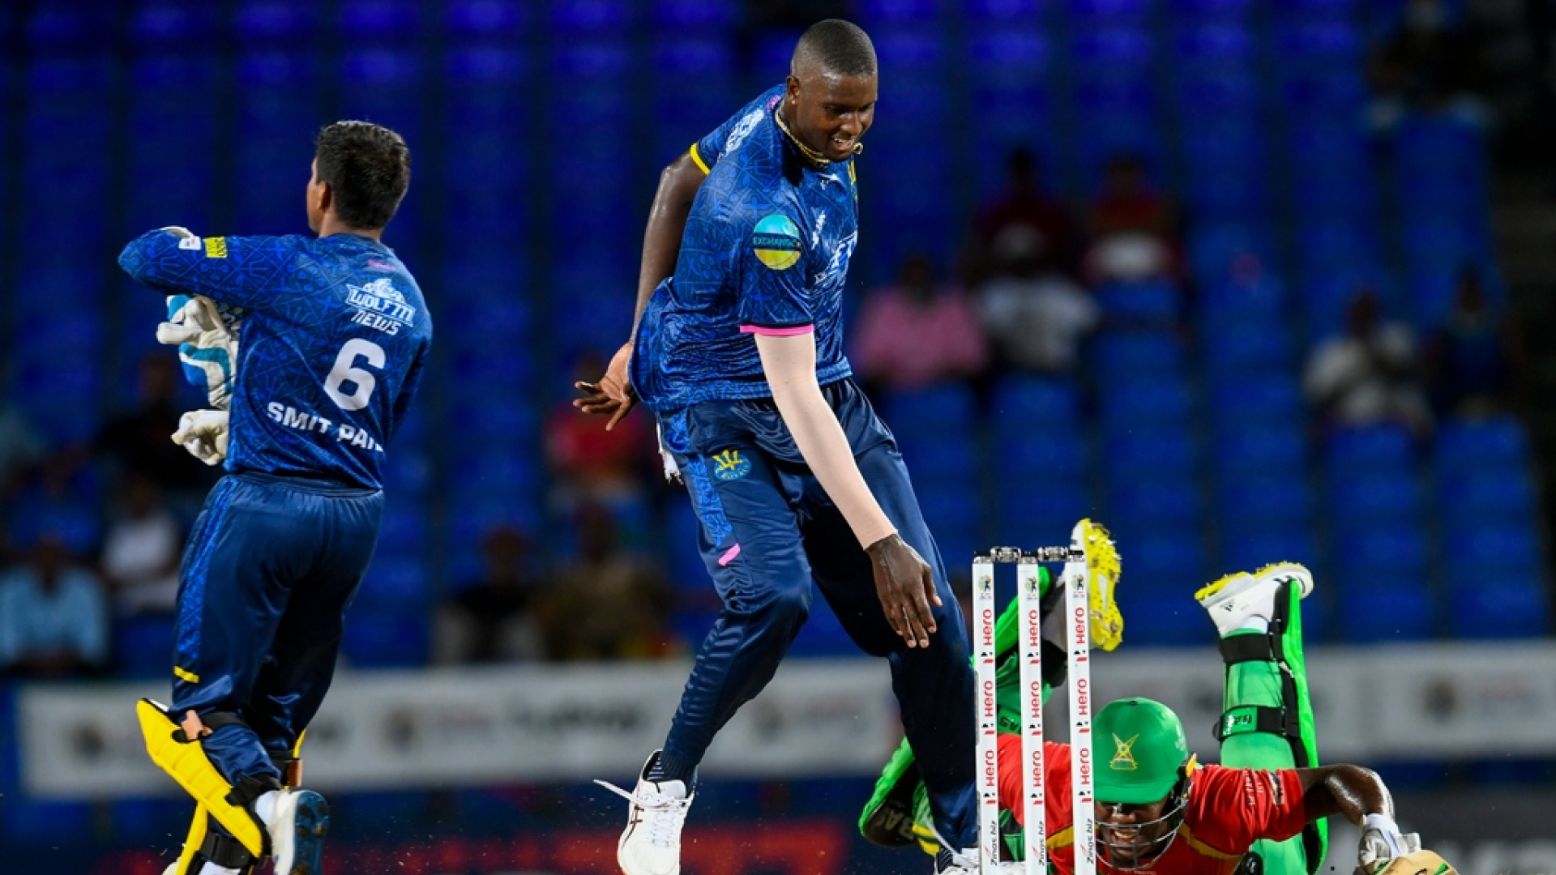 CPL 2021 | BR vs TKR: Boosted by losing streak breaking win, Barbados face the Trinbago challenge